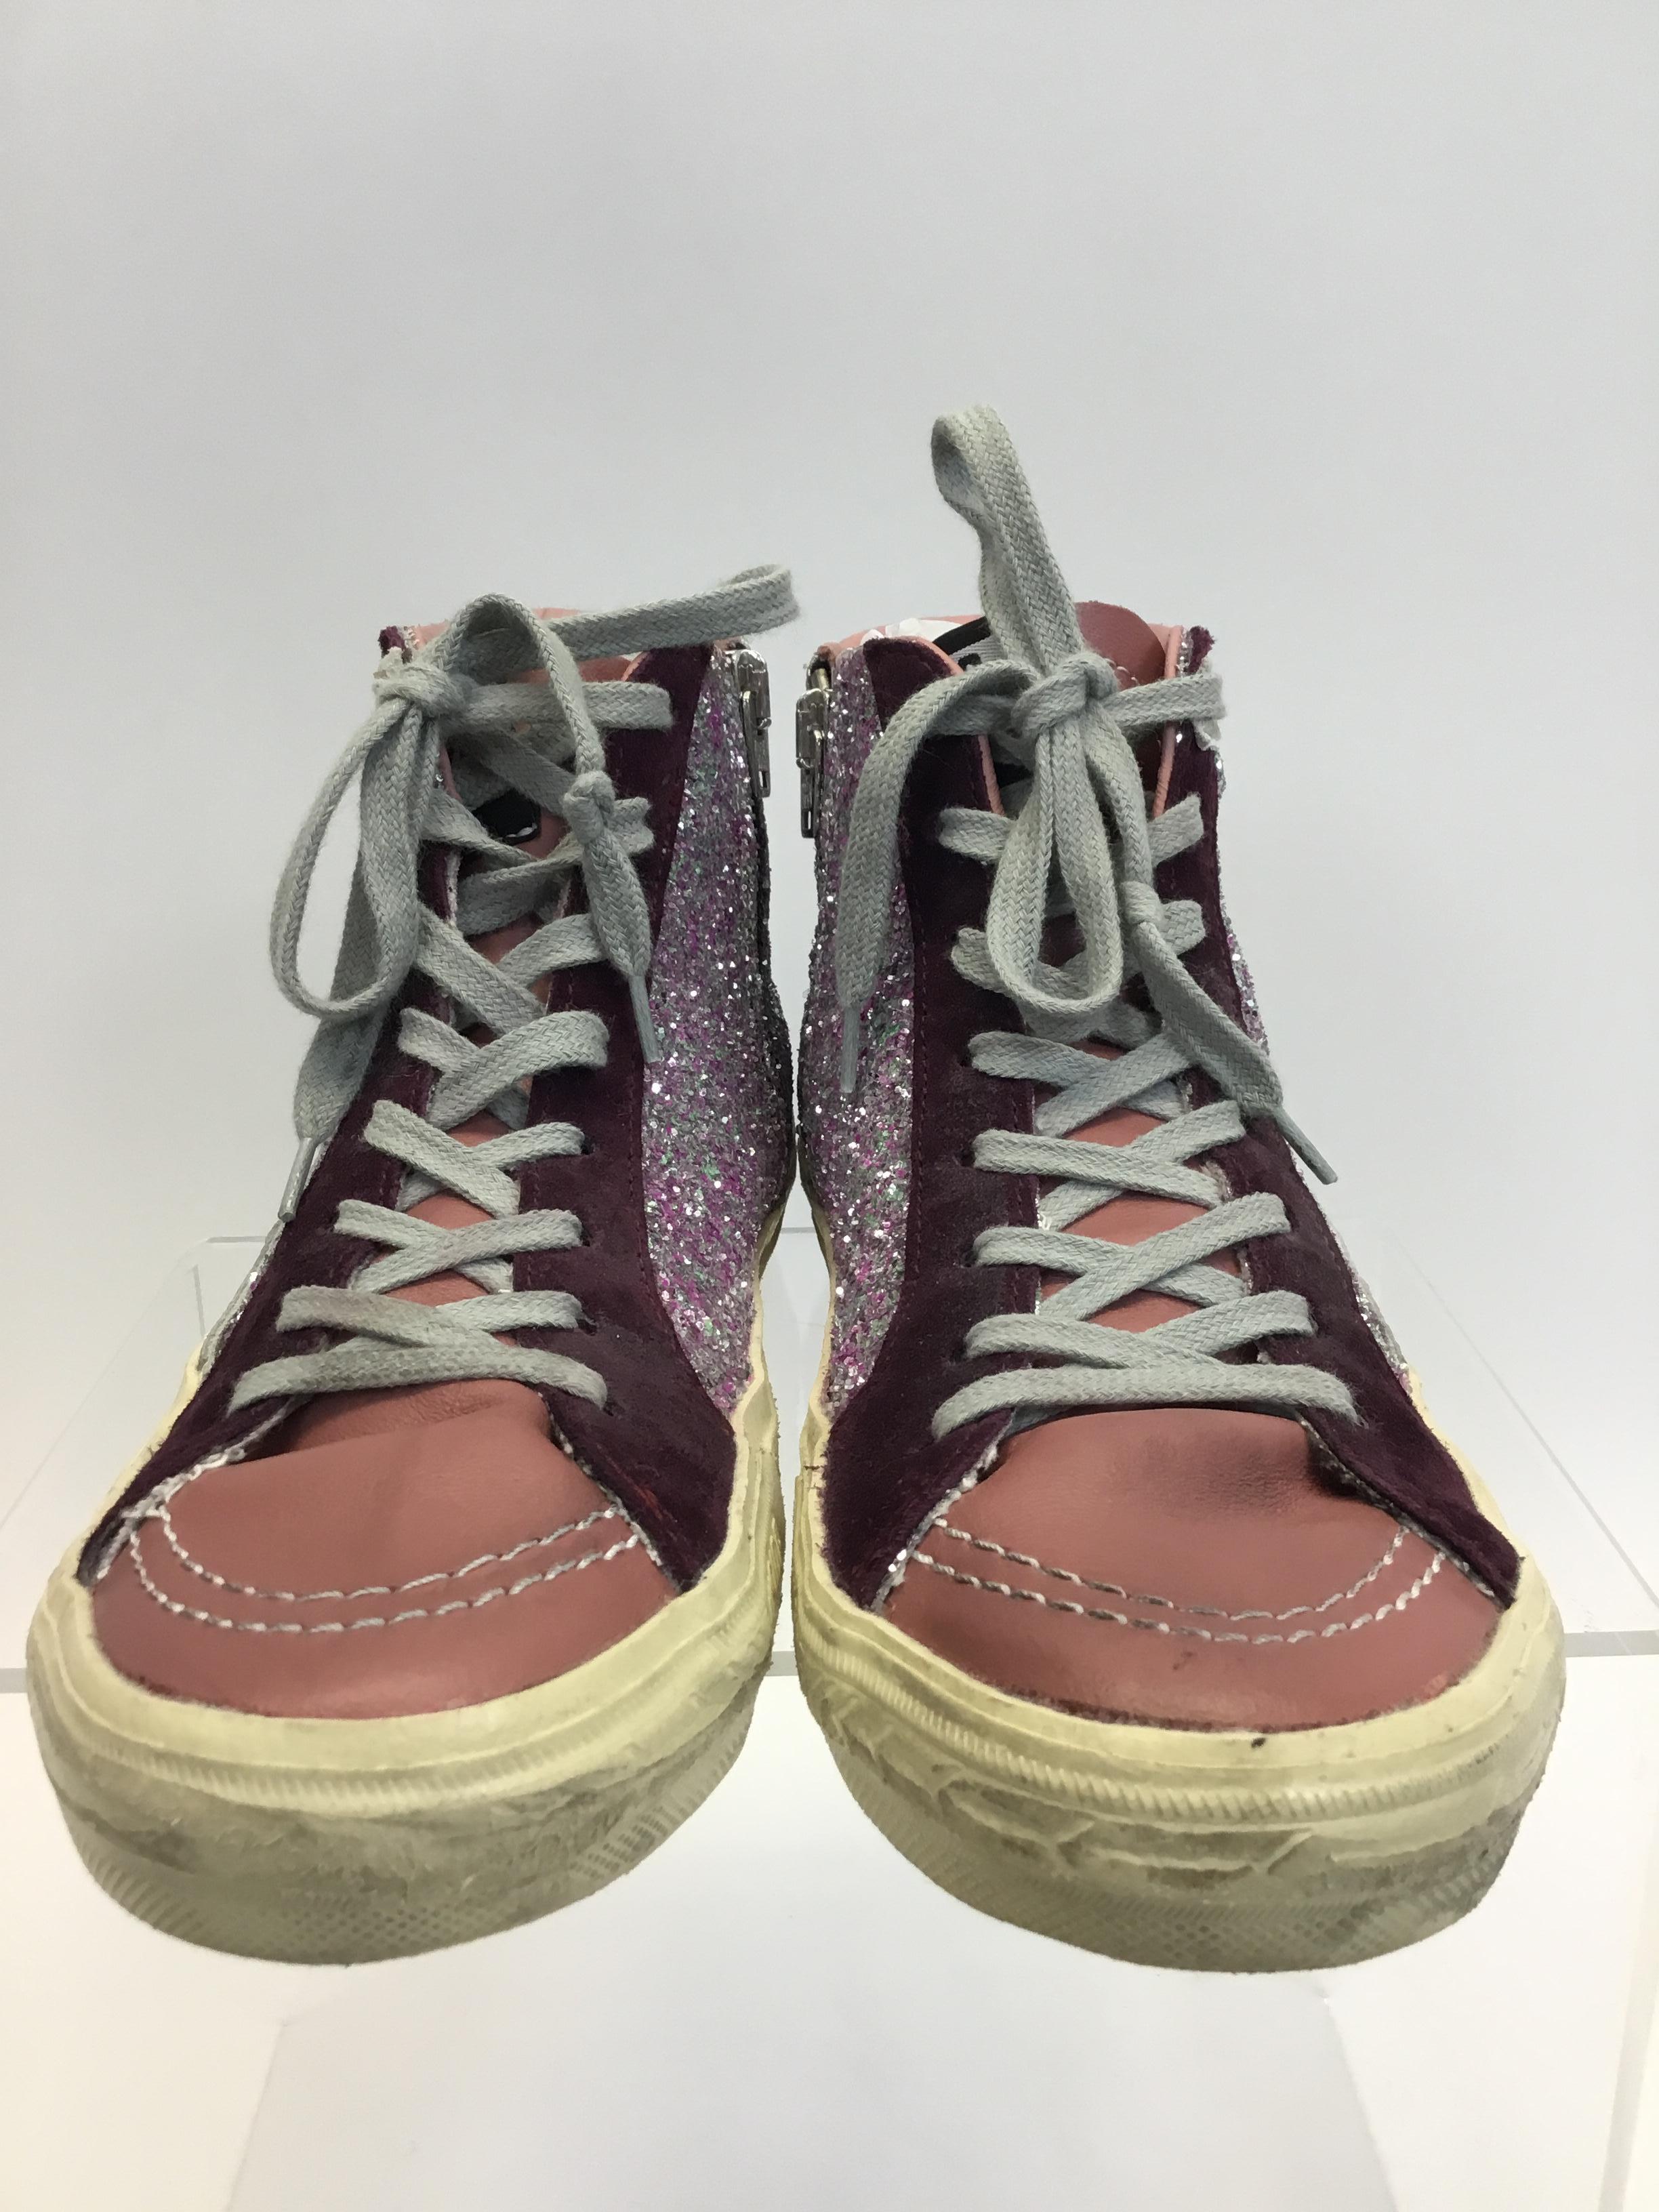 Golden Goose Pink Sparkle High Top Sneaker
$350
Made in Italy
Size 38
Side zipper closure